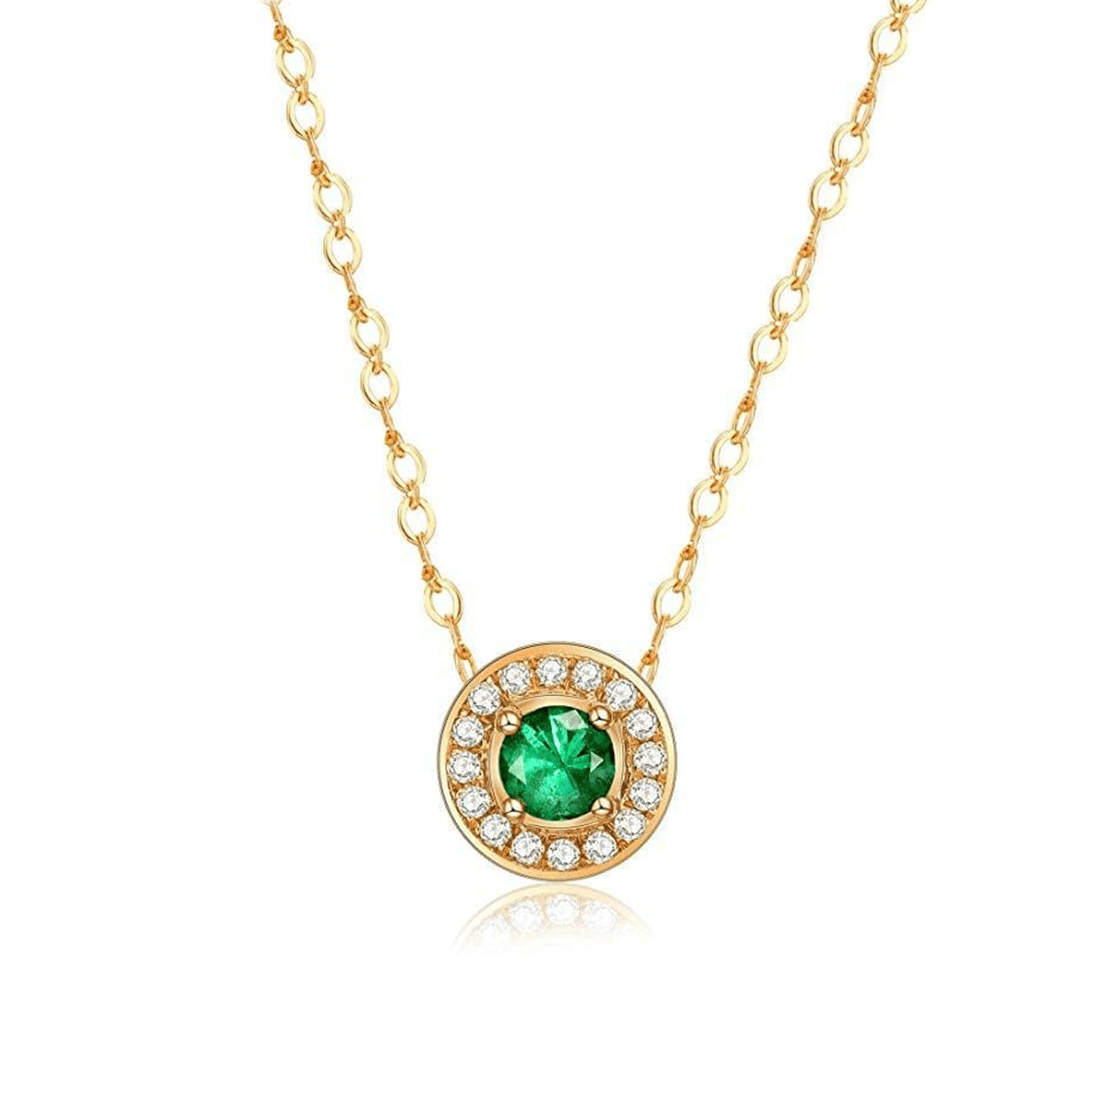 FANCIME "Unconditional Halo" Round Emerald 14K Yellow Gold Necklace Main